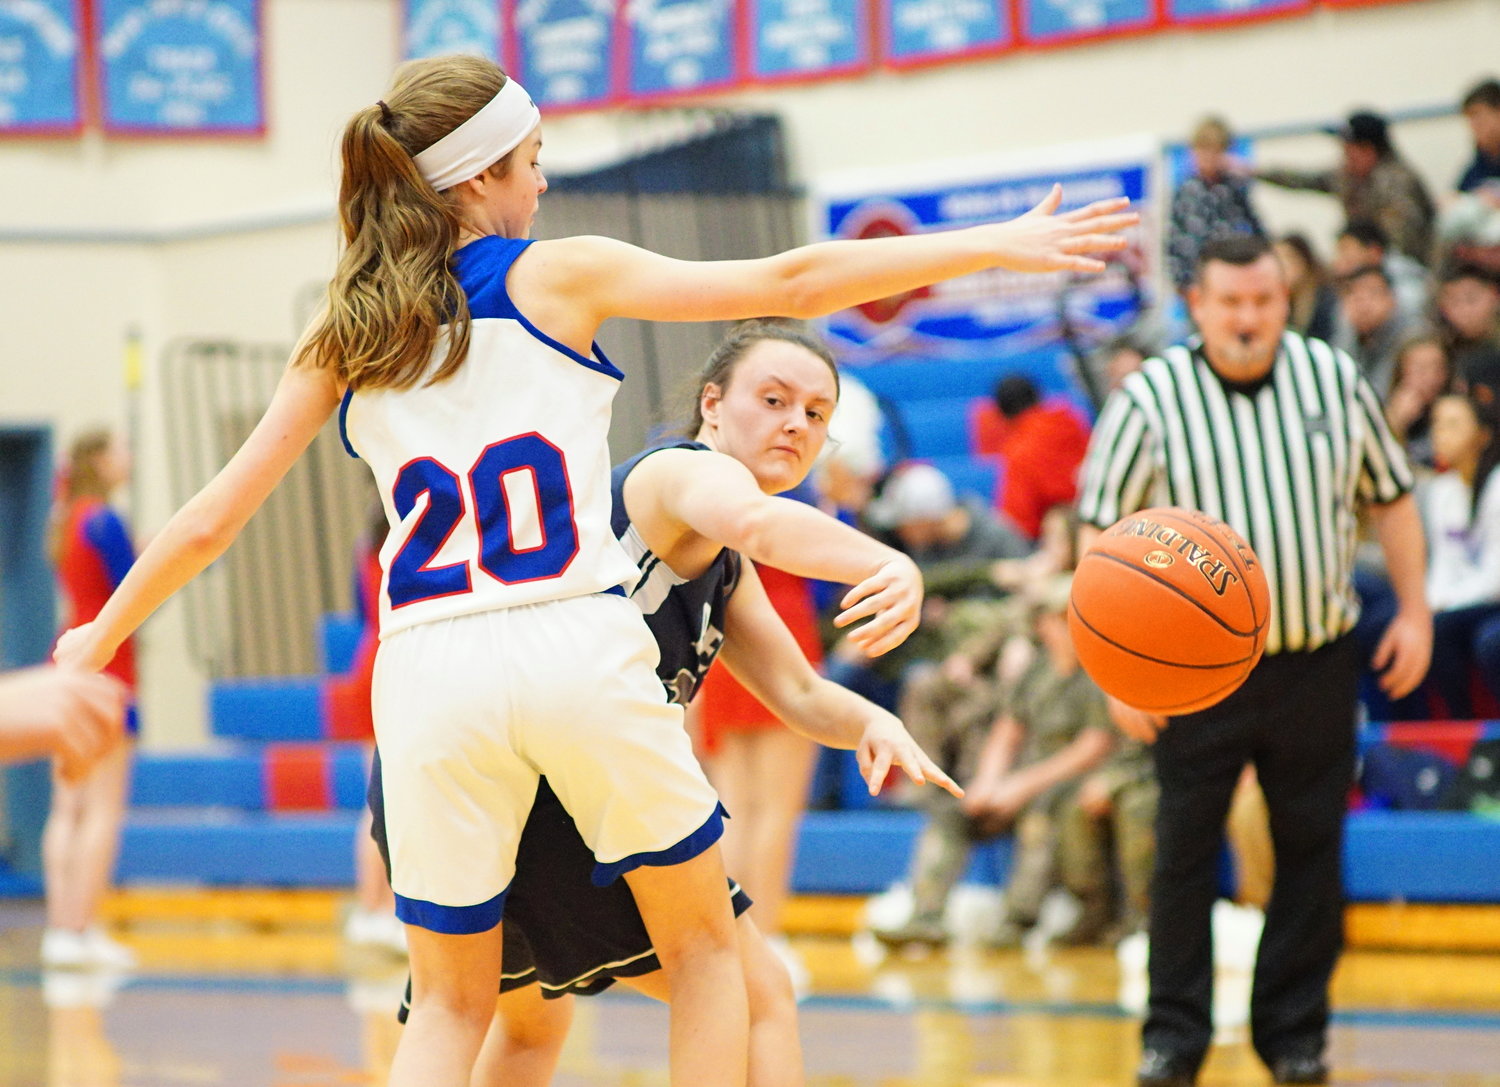 Trojan's Megan Krafczyk (22) makes a pass during a game against Willapa Valley Thursday night in Menlo.